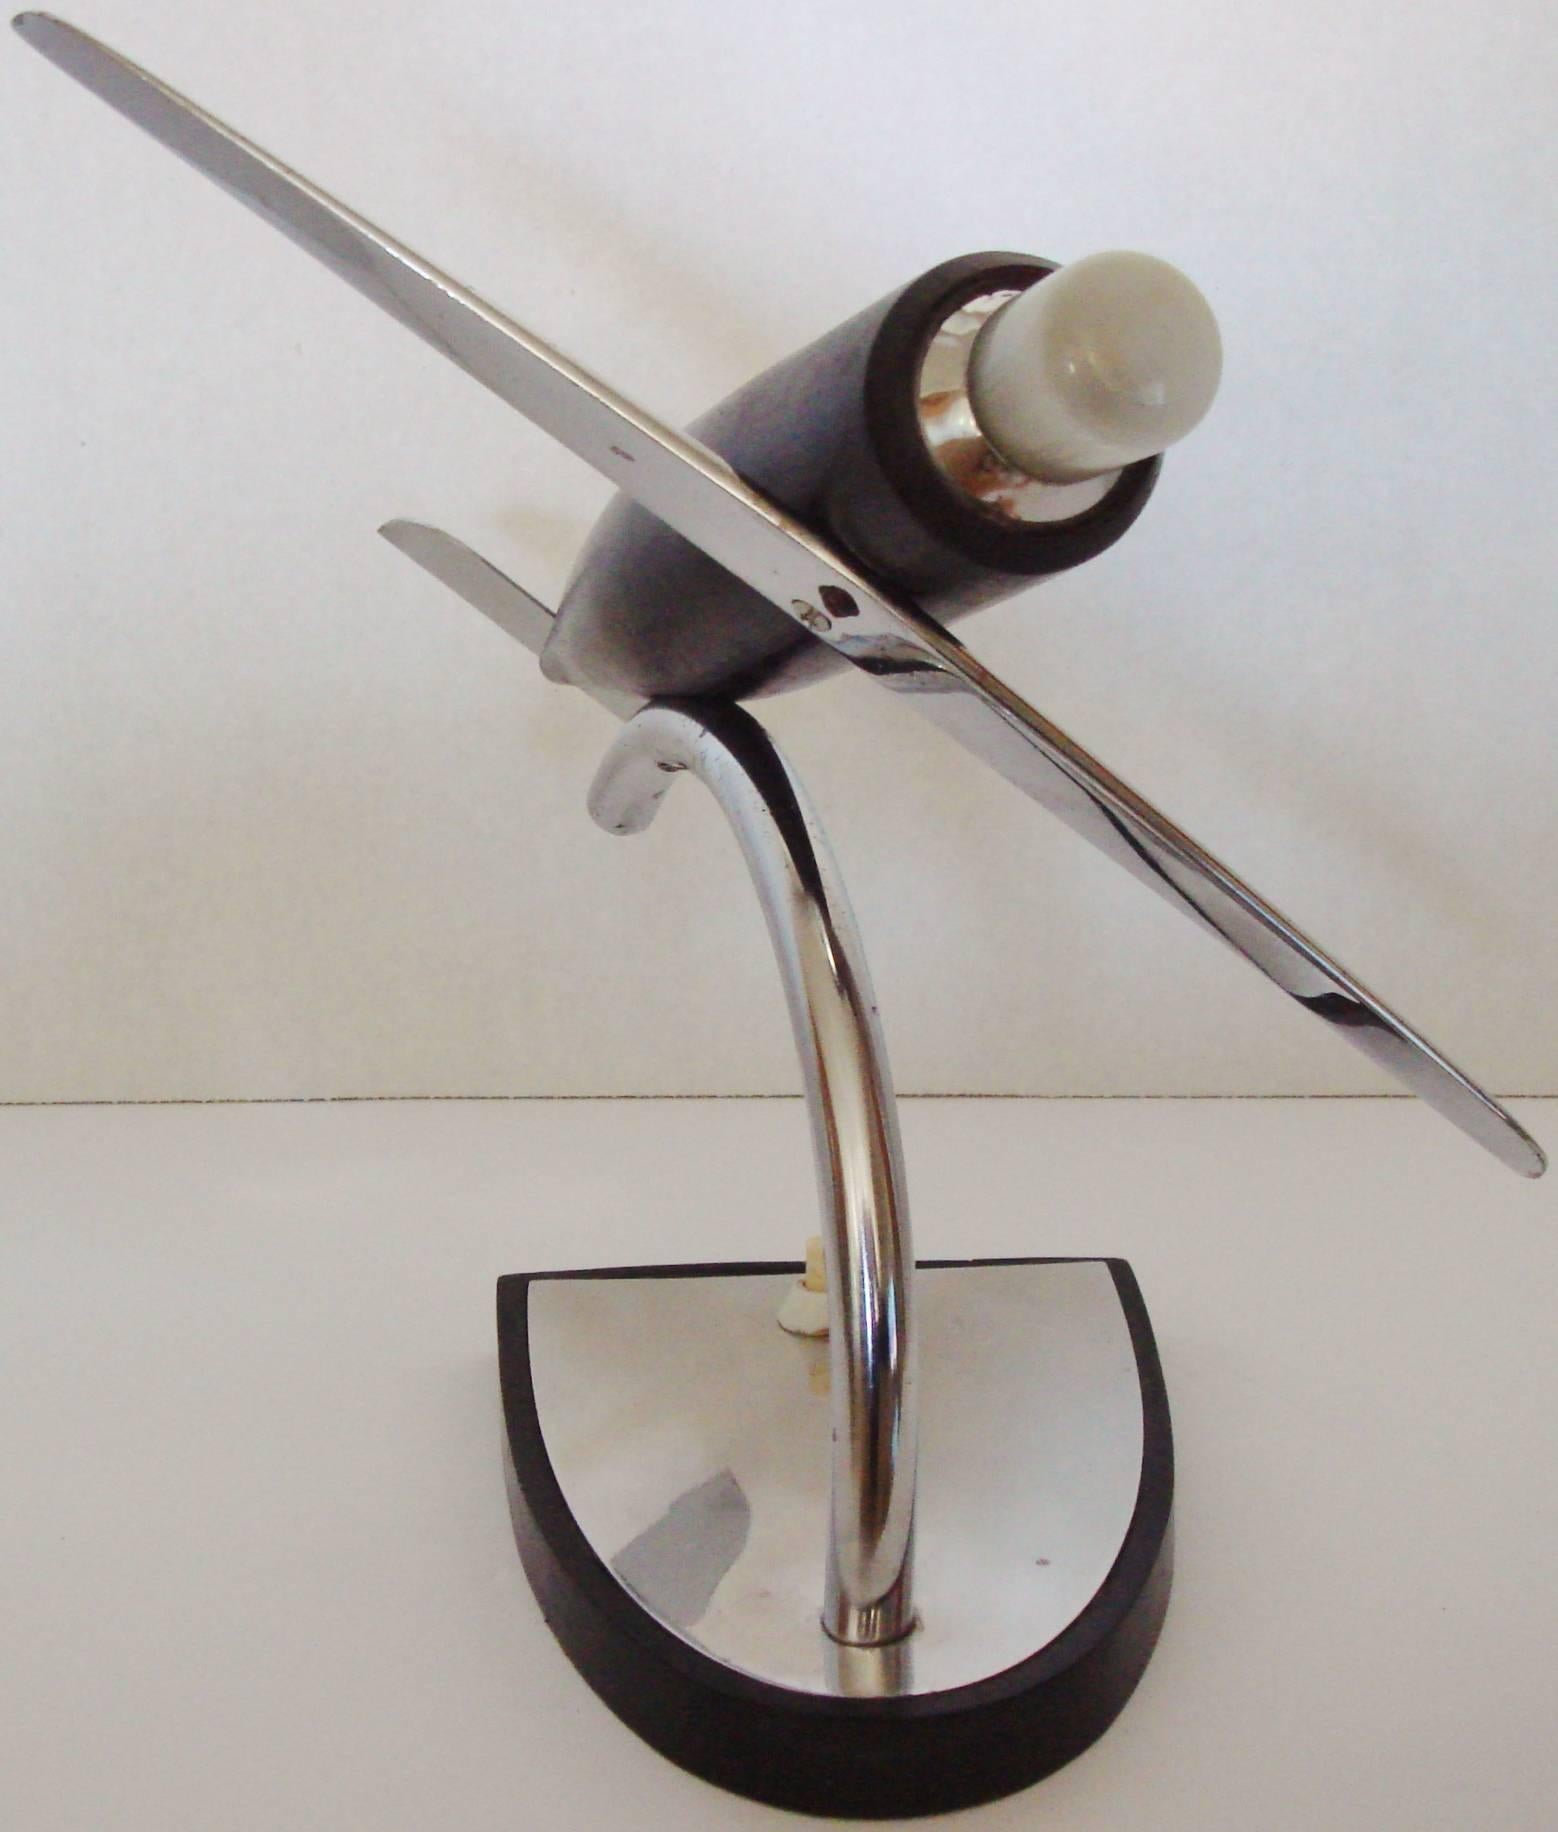 Plated German Art Deco Chrome, Ebonized Wood and Bakelite Stylized Airplane Accent Lamp For Sale